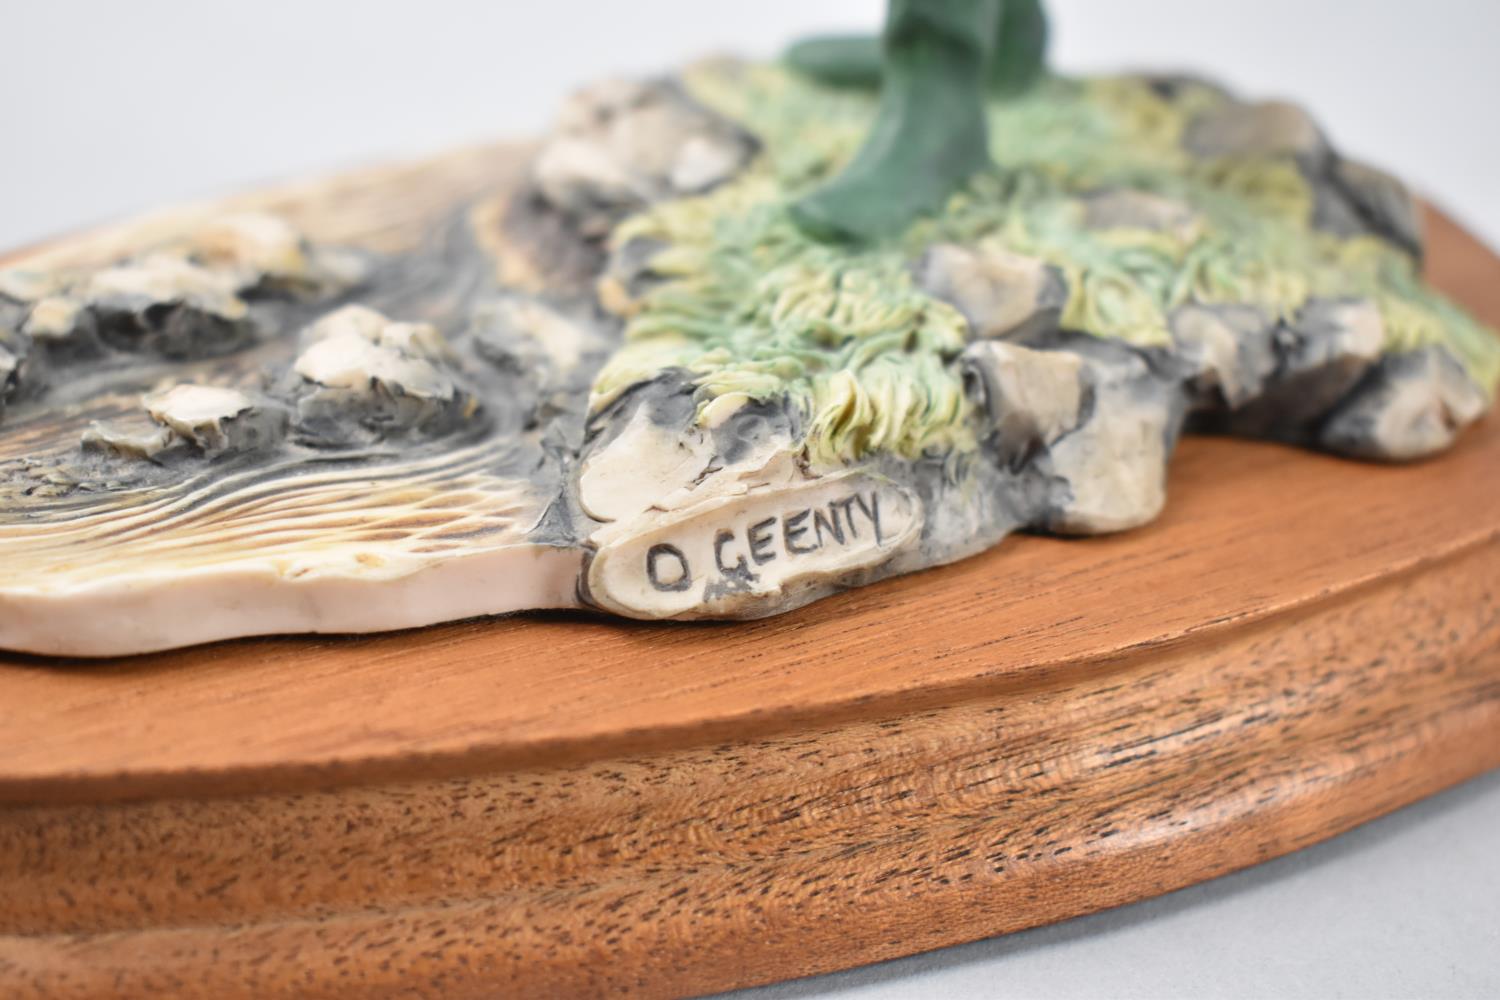 A Border Fine Arts Study of a Fly Fisherman, Model No.110 by David Geenty on Oval Wooden Base - Image 3 of 3